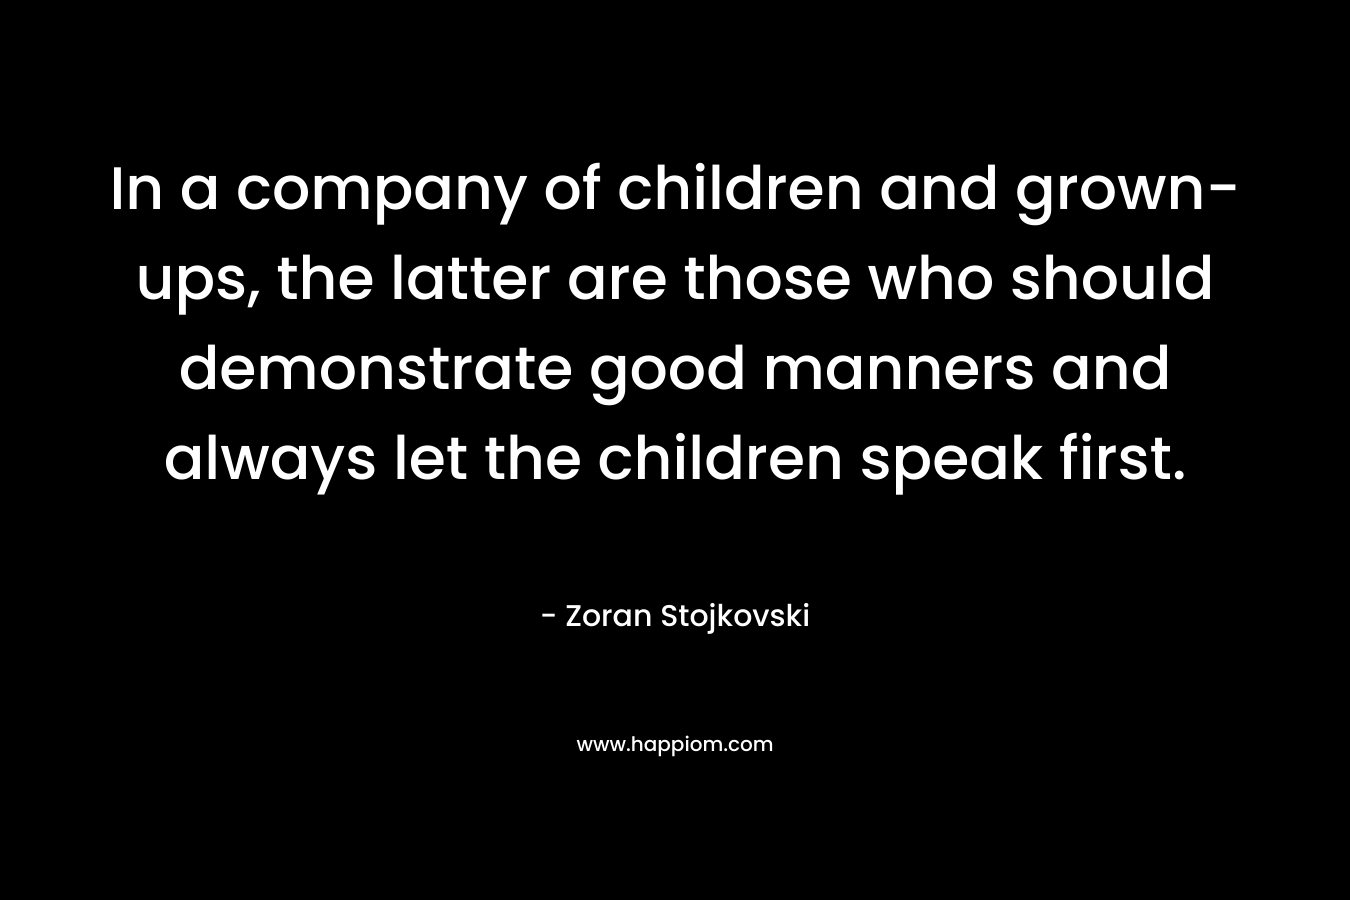 In a company of children and grown-ups, the latter are those who should demonstrate good manners and always let the children speak first.